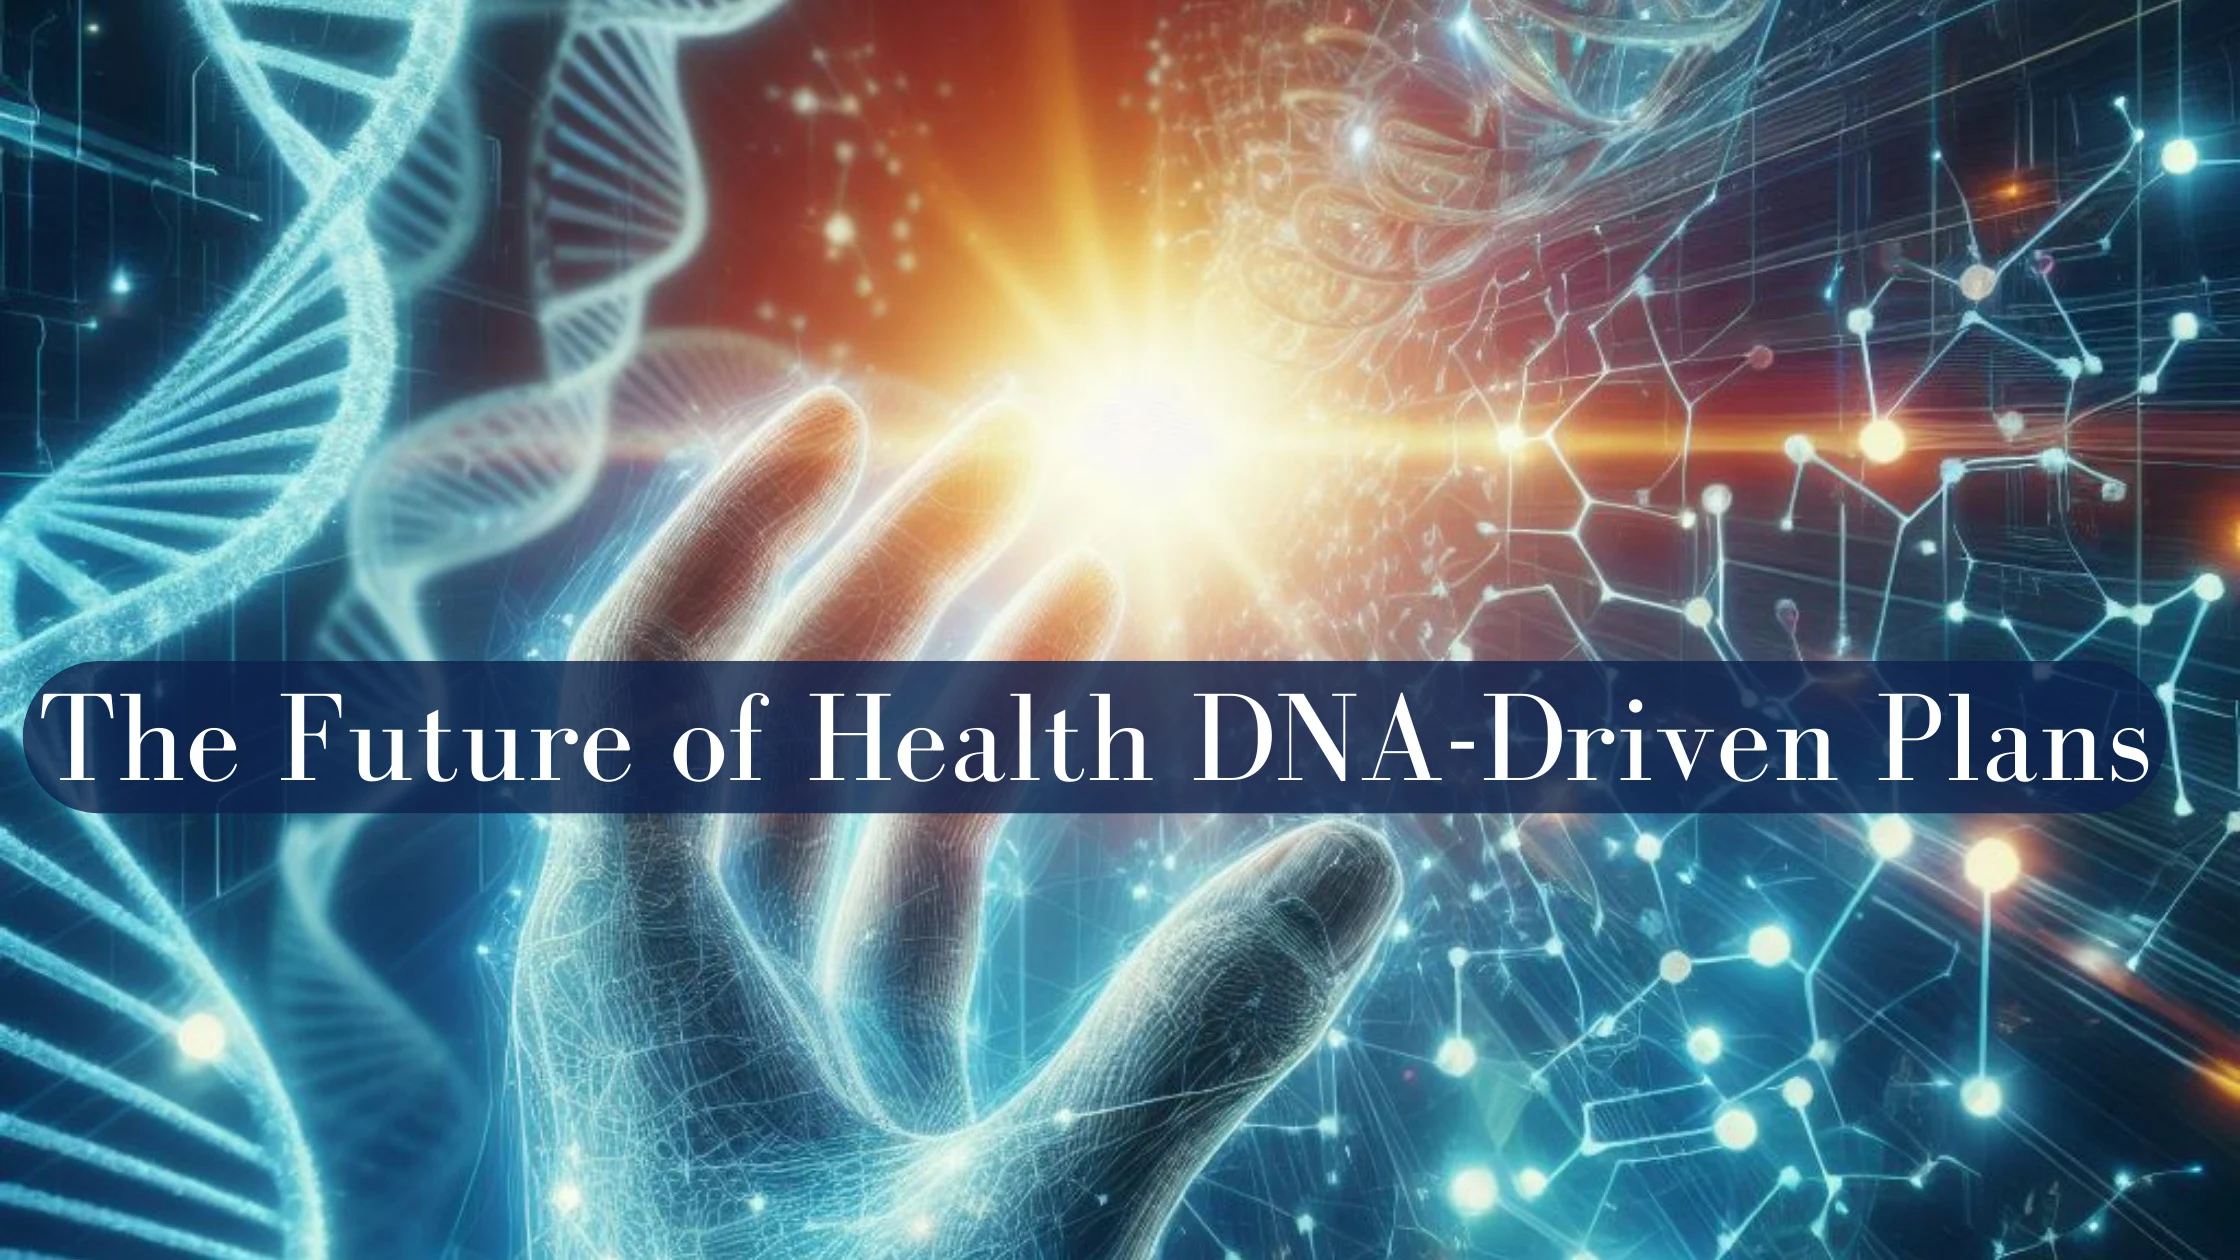 The Future of Health DNA-Driven Plans